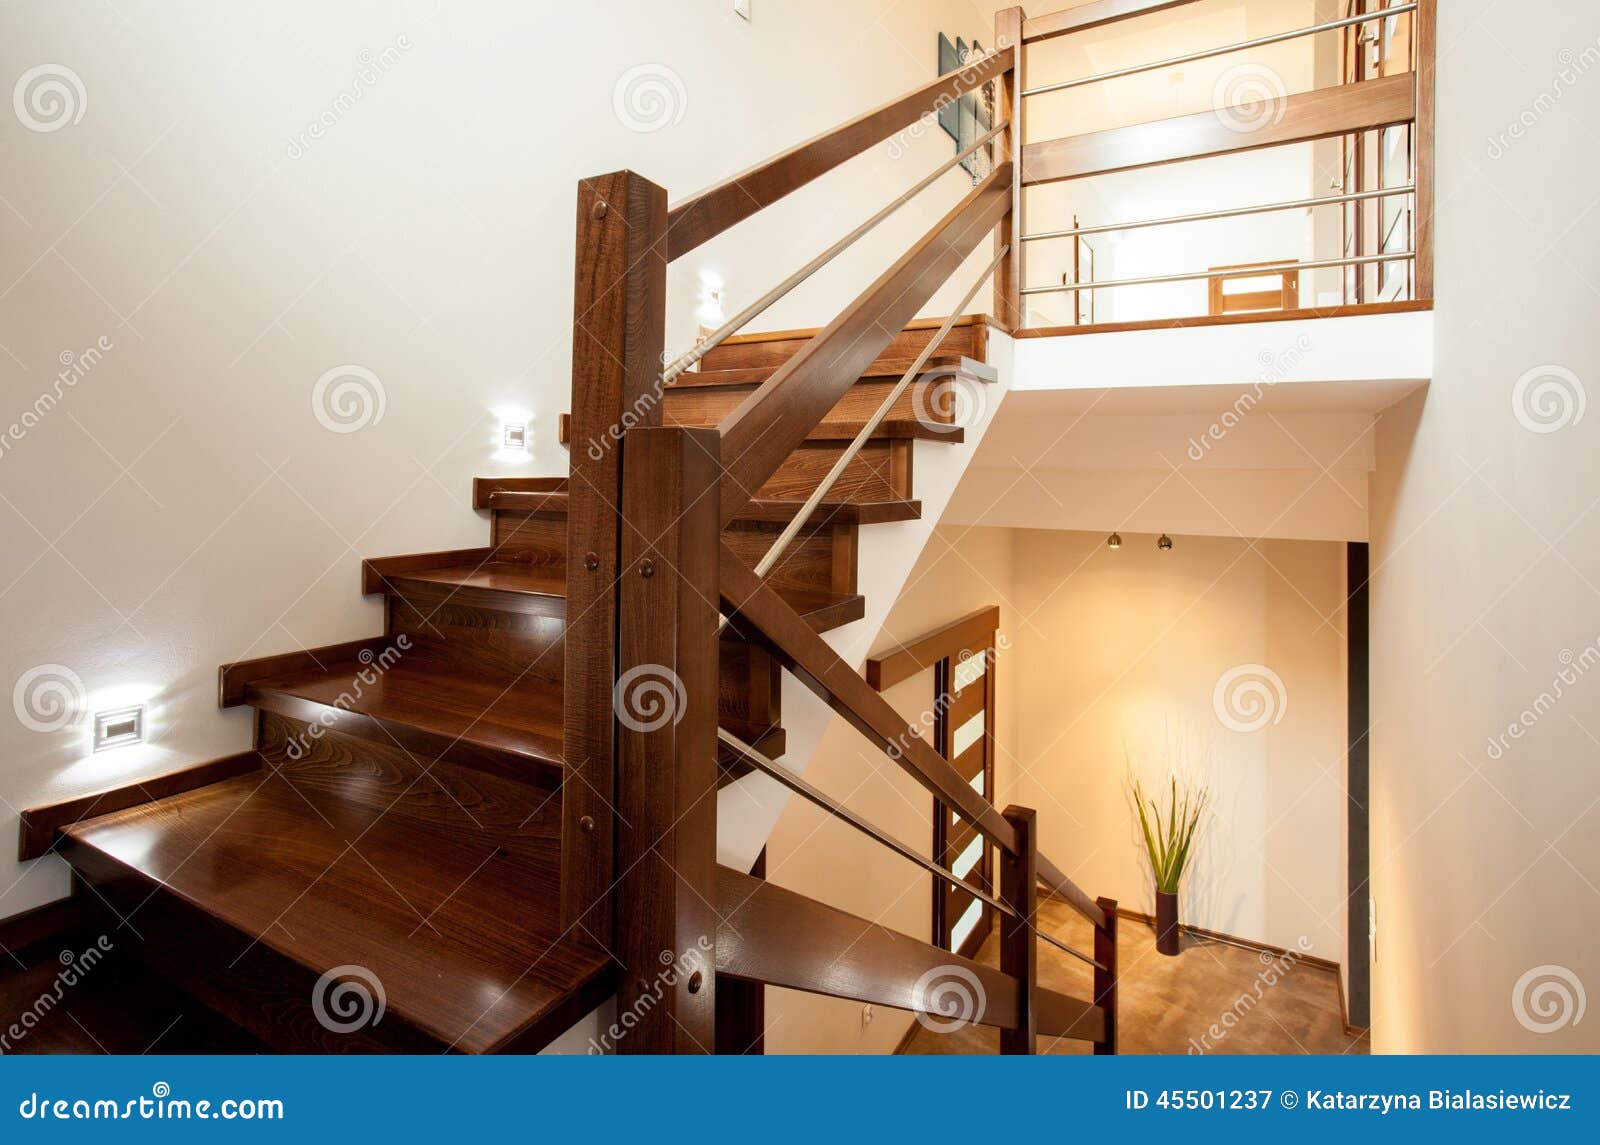 wooden stairs at home